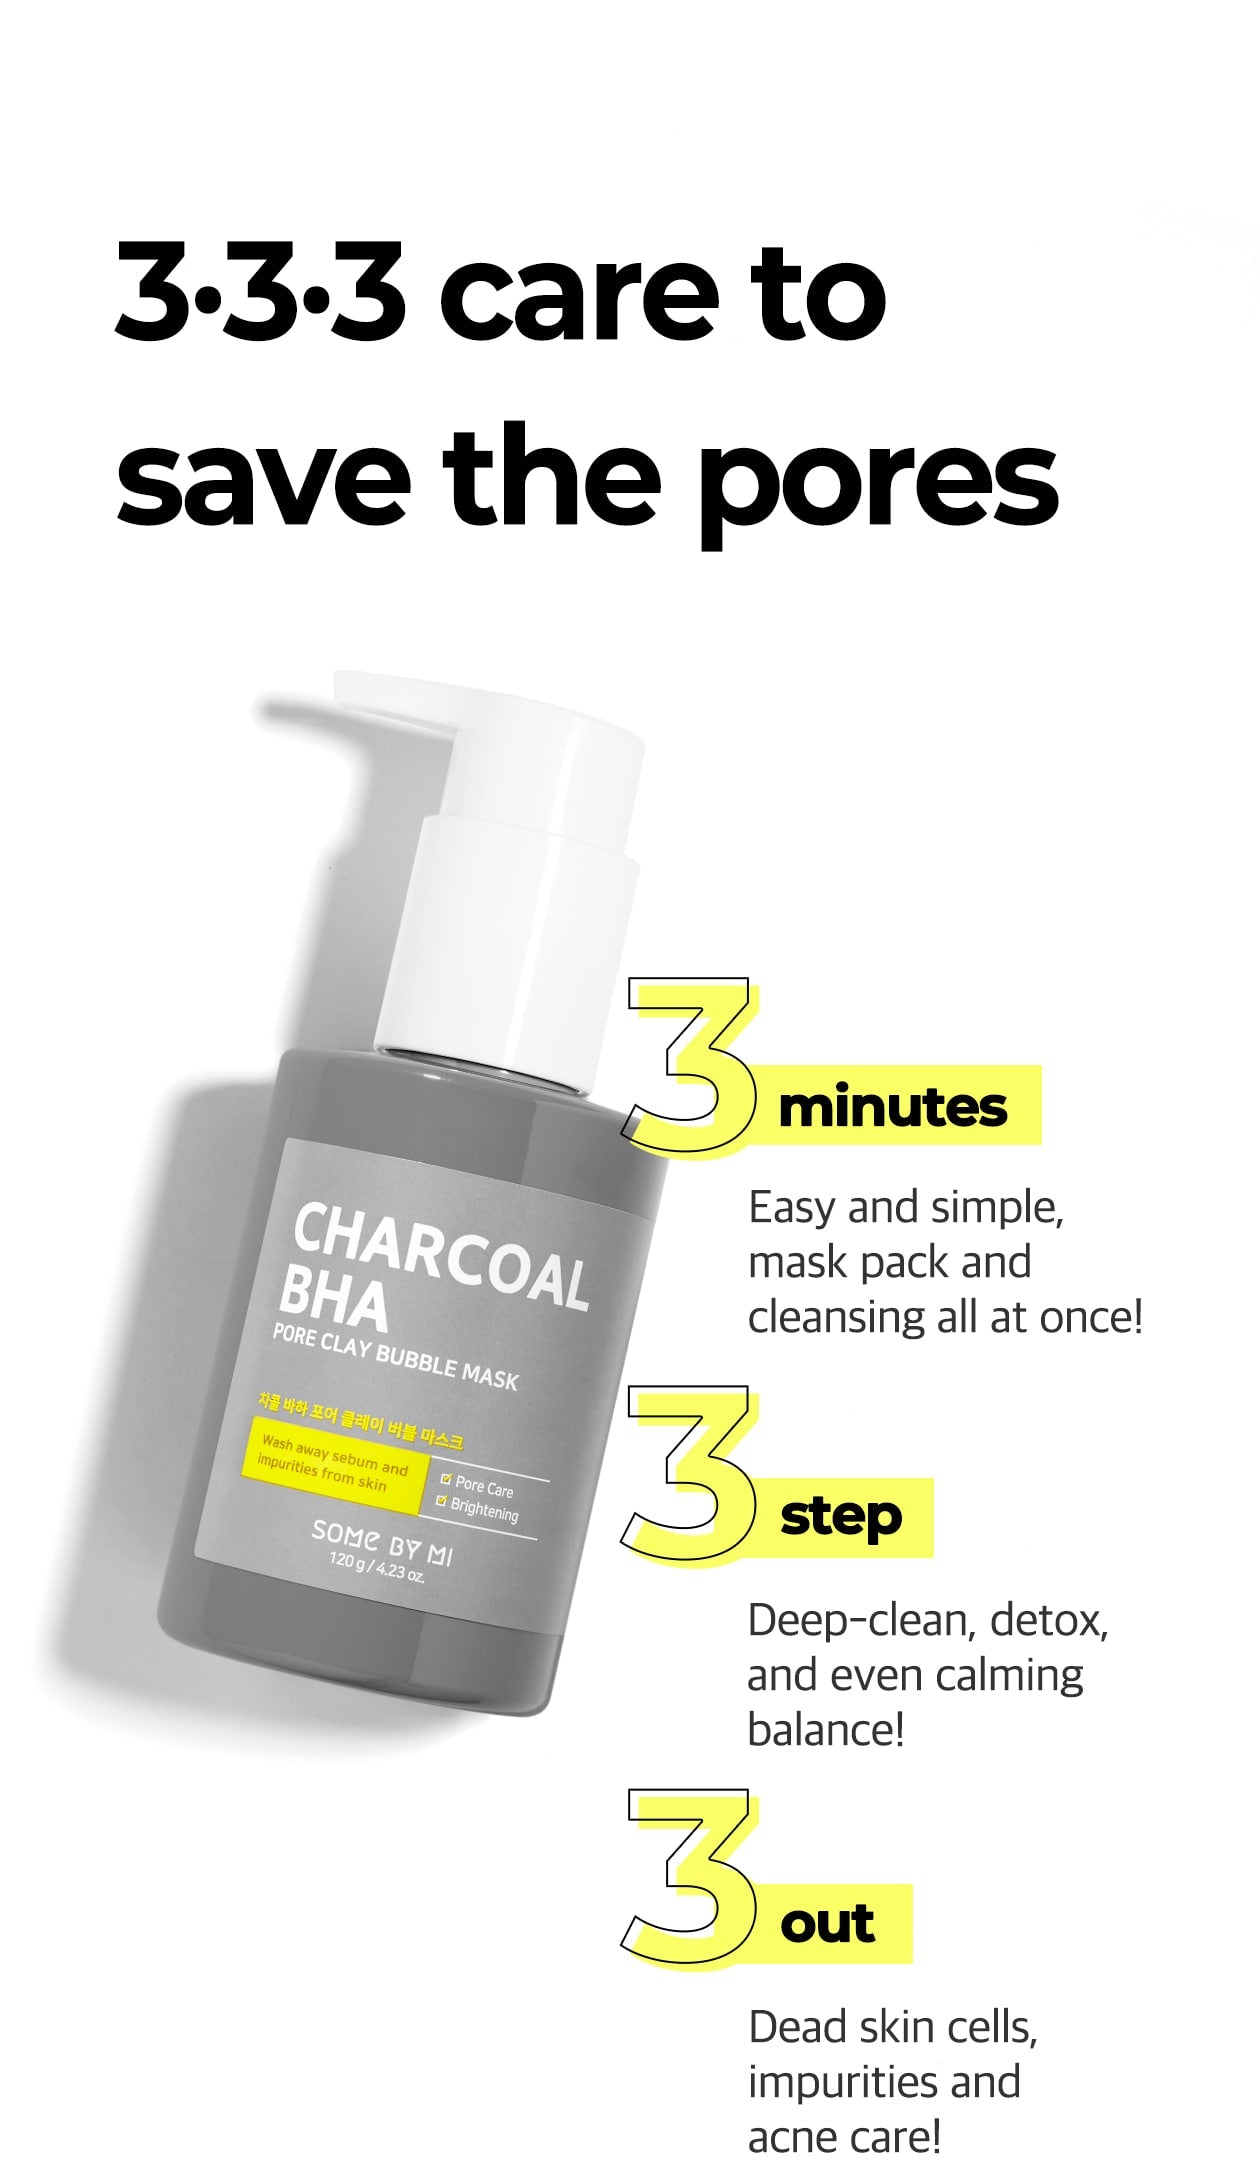 image version of product description of some by mi charcoal bha pore clay bubble mask